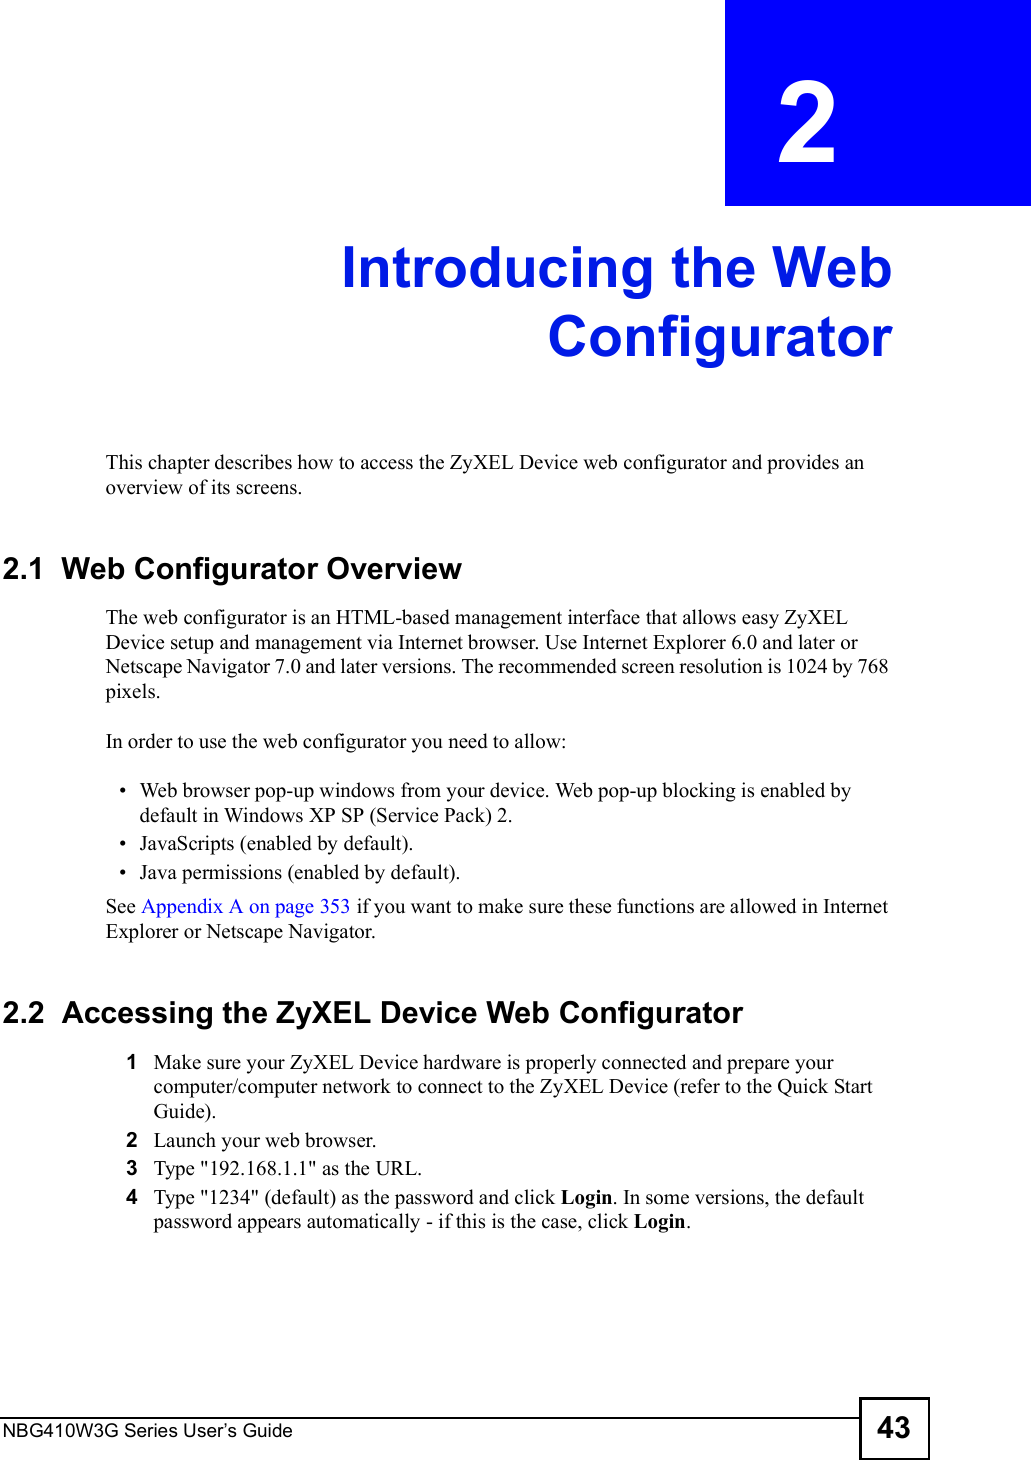 NBG410W3G Series User s Guide 43CHAPTER  2 Introducing the WebConfiguratorThis chapter describes how to access the ZyXEL Device web configurator and provides an overview of its screens.2.1  Web Configurator OverviewThe web configurator is an HTML-based management interface that allows easy ZyXEL Device setup and management via Internet browser. Use Internet Explorer 6.0 and later or Netscape Navigator 7.0 and later versions. The recommended screen resolution is 1024 by 768 pixels.In order to use the web configurator you need to allow: Web browser pop-up windows from your device. Web pop-up blocking is enabled by default in Windows XP SP (Service Pack) 2. JavaScripts (enabled by default). Java permissions (enabled by default).See Appendix A on page 353 if you want to make sure these functions are allowed in Internet Explorer or Netscape Navigator. 2.2  Accessing the ZyXEL Device Web Configurator1Make sure your ZyXEL Device hardware is properly connected and prepare your computer/computer network to connect to the ZyXEL Device (refer to the Quick Start Guide).2Launch your web browser.3Type &quot;192.168.1.1&quot; as the URL.4Type &quot;1234&quot; (default) as the password and click Login. In some versions, the default password appears automatically - if this is the case, click Login. 